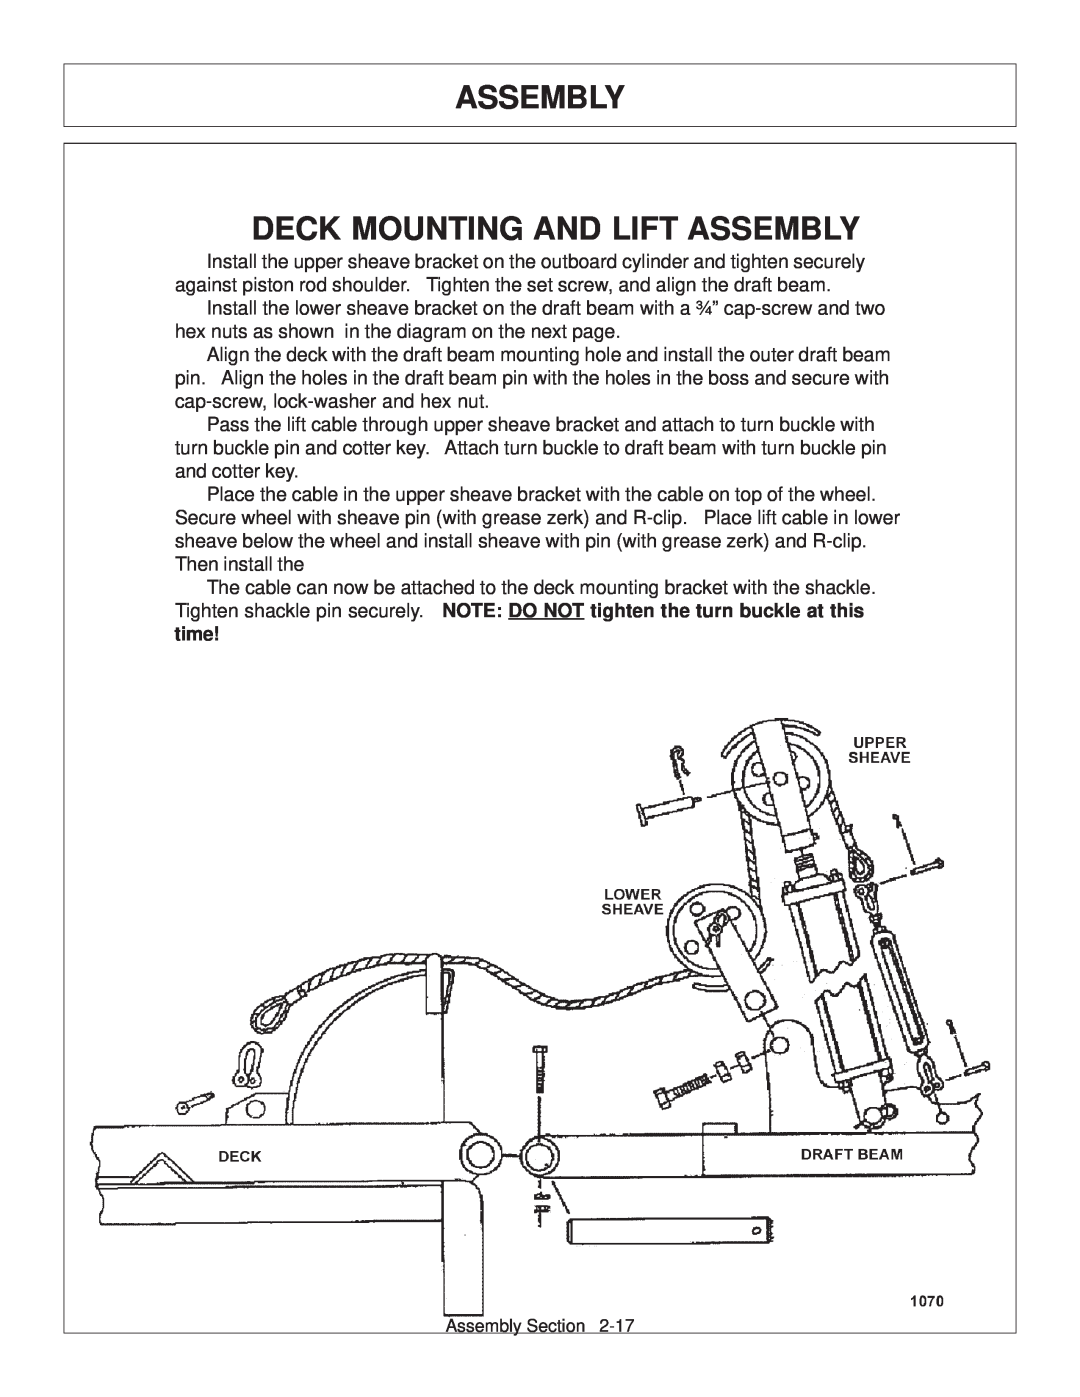 Tiger Products Co., Ltd TS 100A manual Deck Mounting And Lift Assembly 